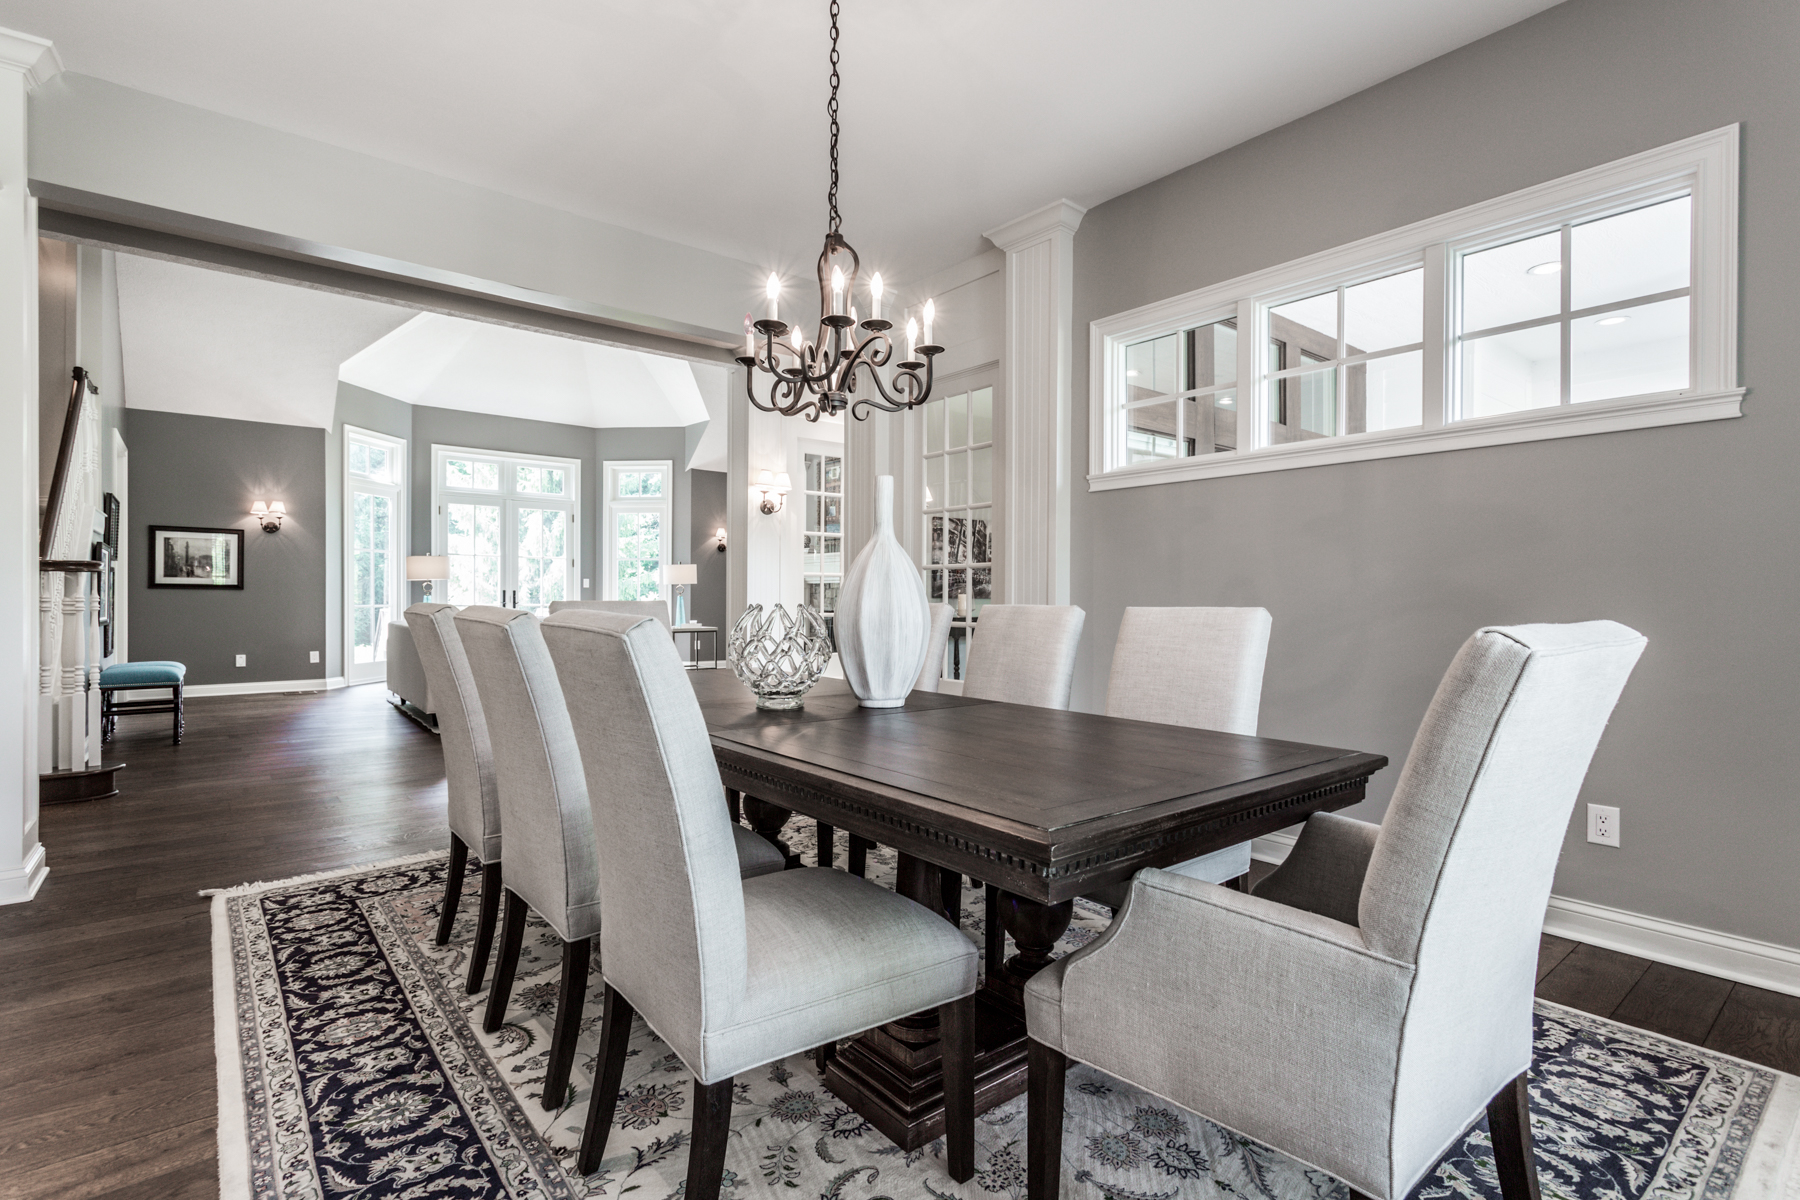 Real Estate With Archways Dining Room